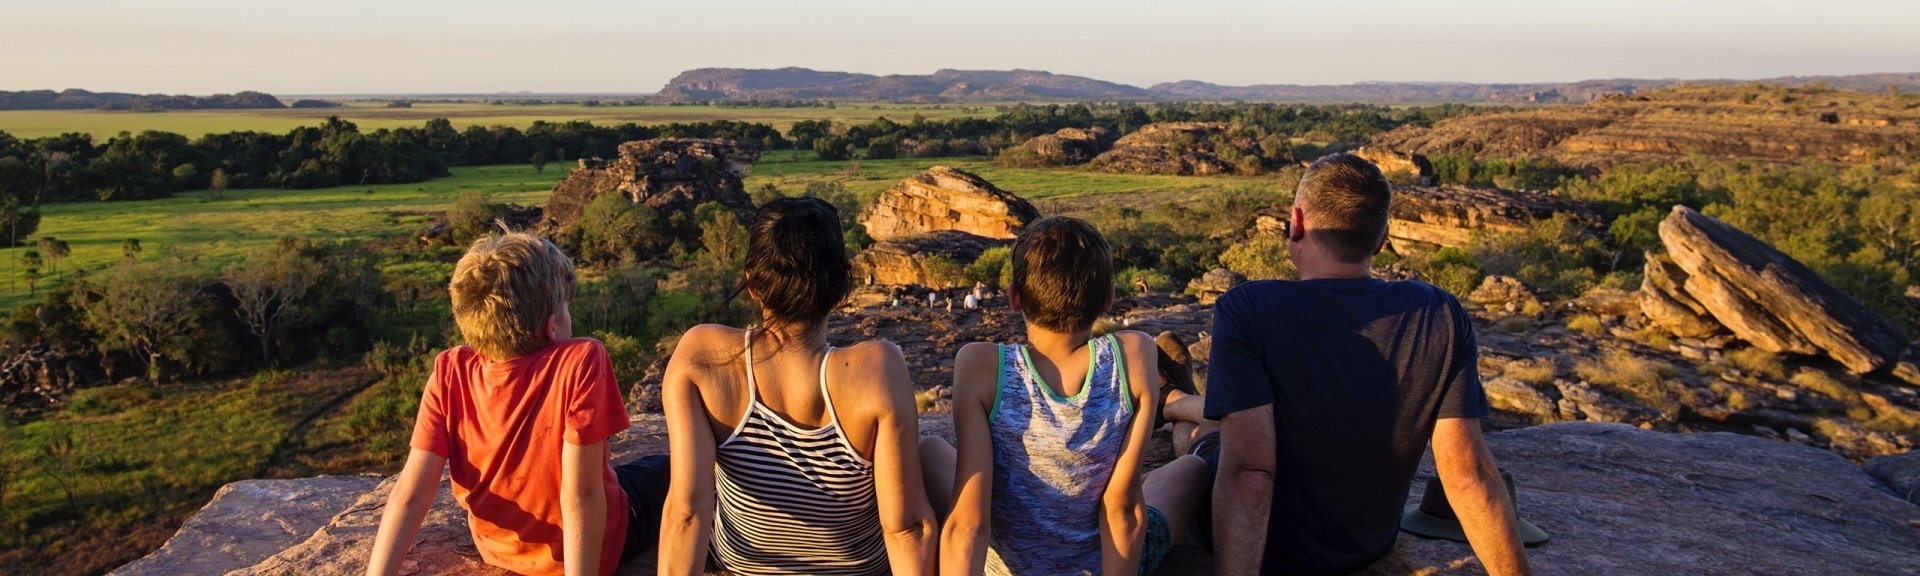 What is Kakadu national park famous for?